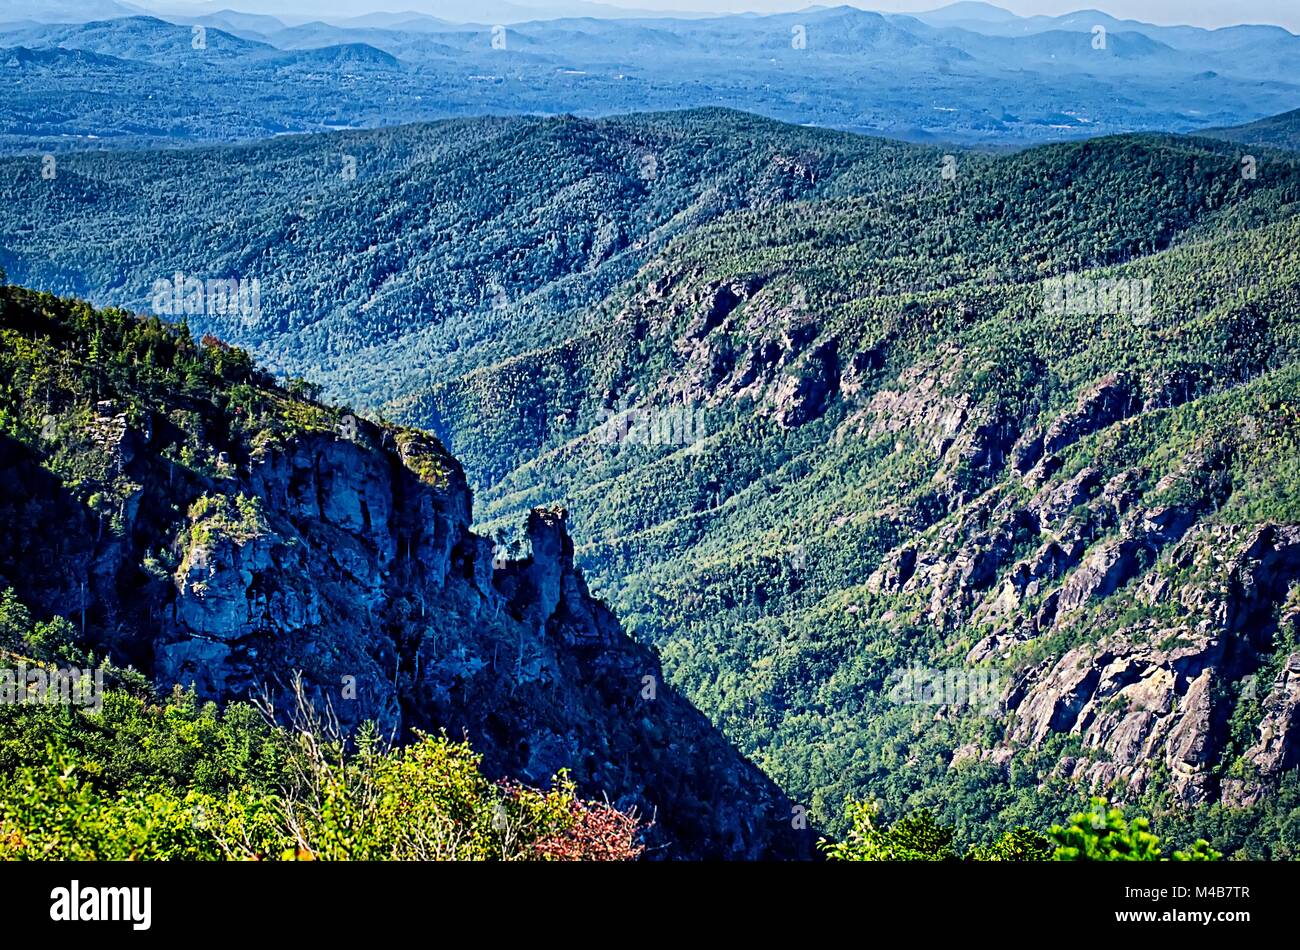 Hawksbill Mountain at Linville gorge with Table Rock Mountain landscapes Stock Photo